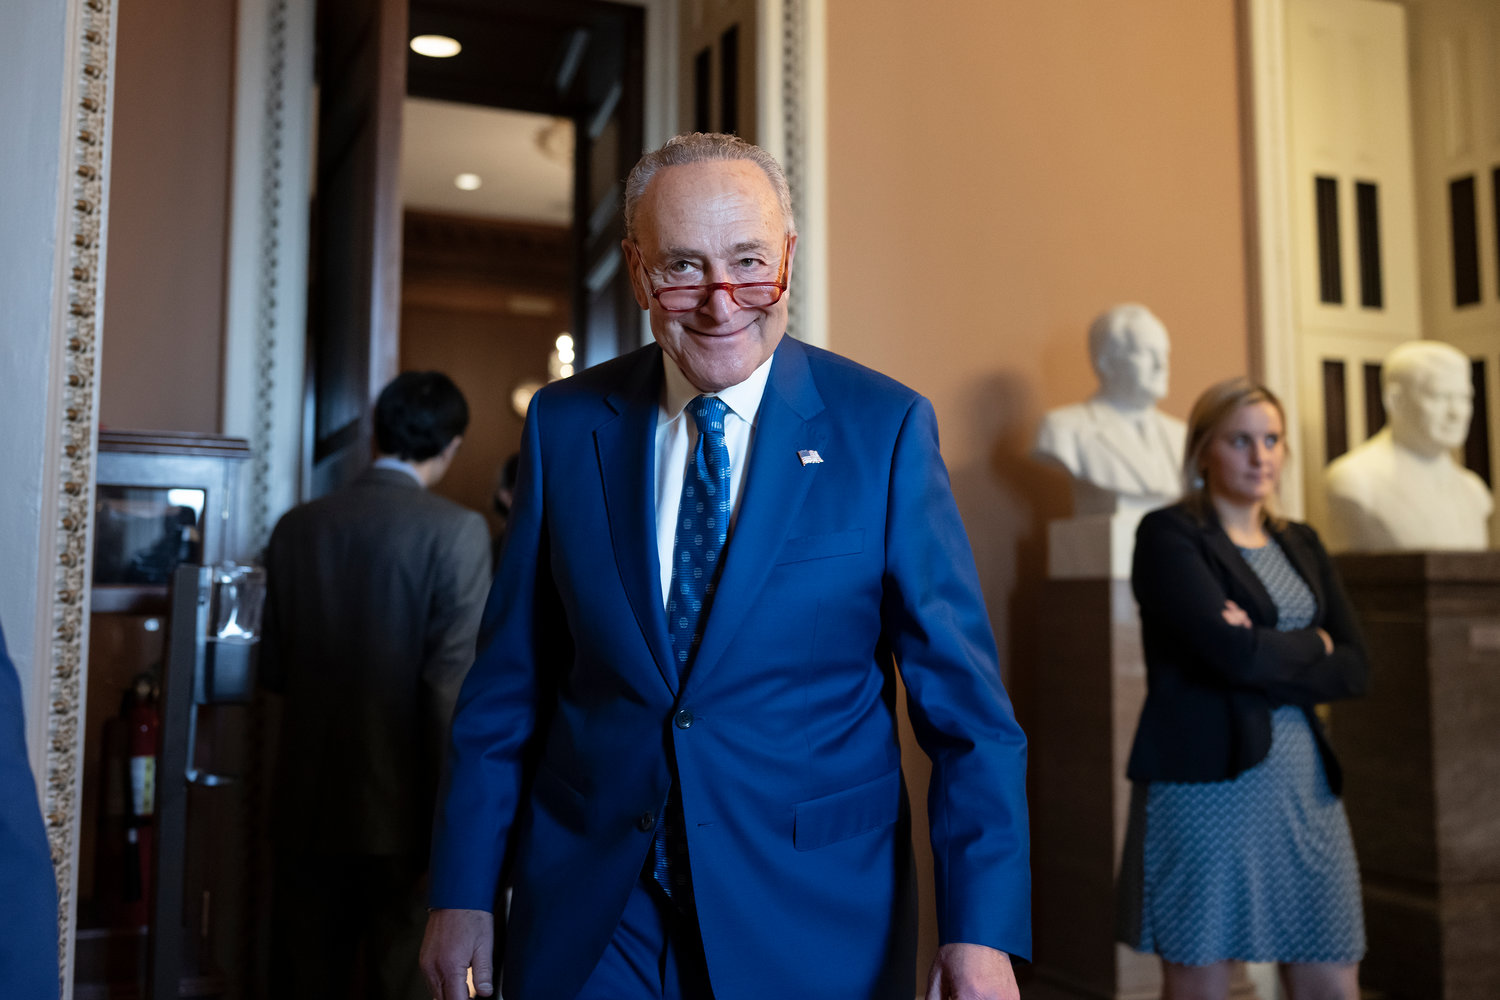 Senate Majority Leader Chuck Schumer, D-N.Y., grins as he emerges from the closed-door Senate Democratic Caucus leadership election at the Capitol in Washington, Thursday, Dec. 8, 2022. Sen. Schumer will remain as Senate Democratic leader and chair of the Democratic Conference in the new Congress beginning Jan. 3, 2023.